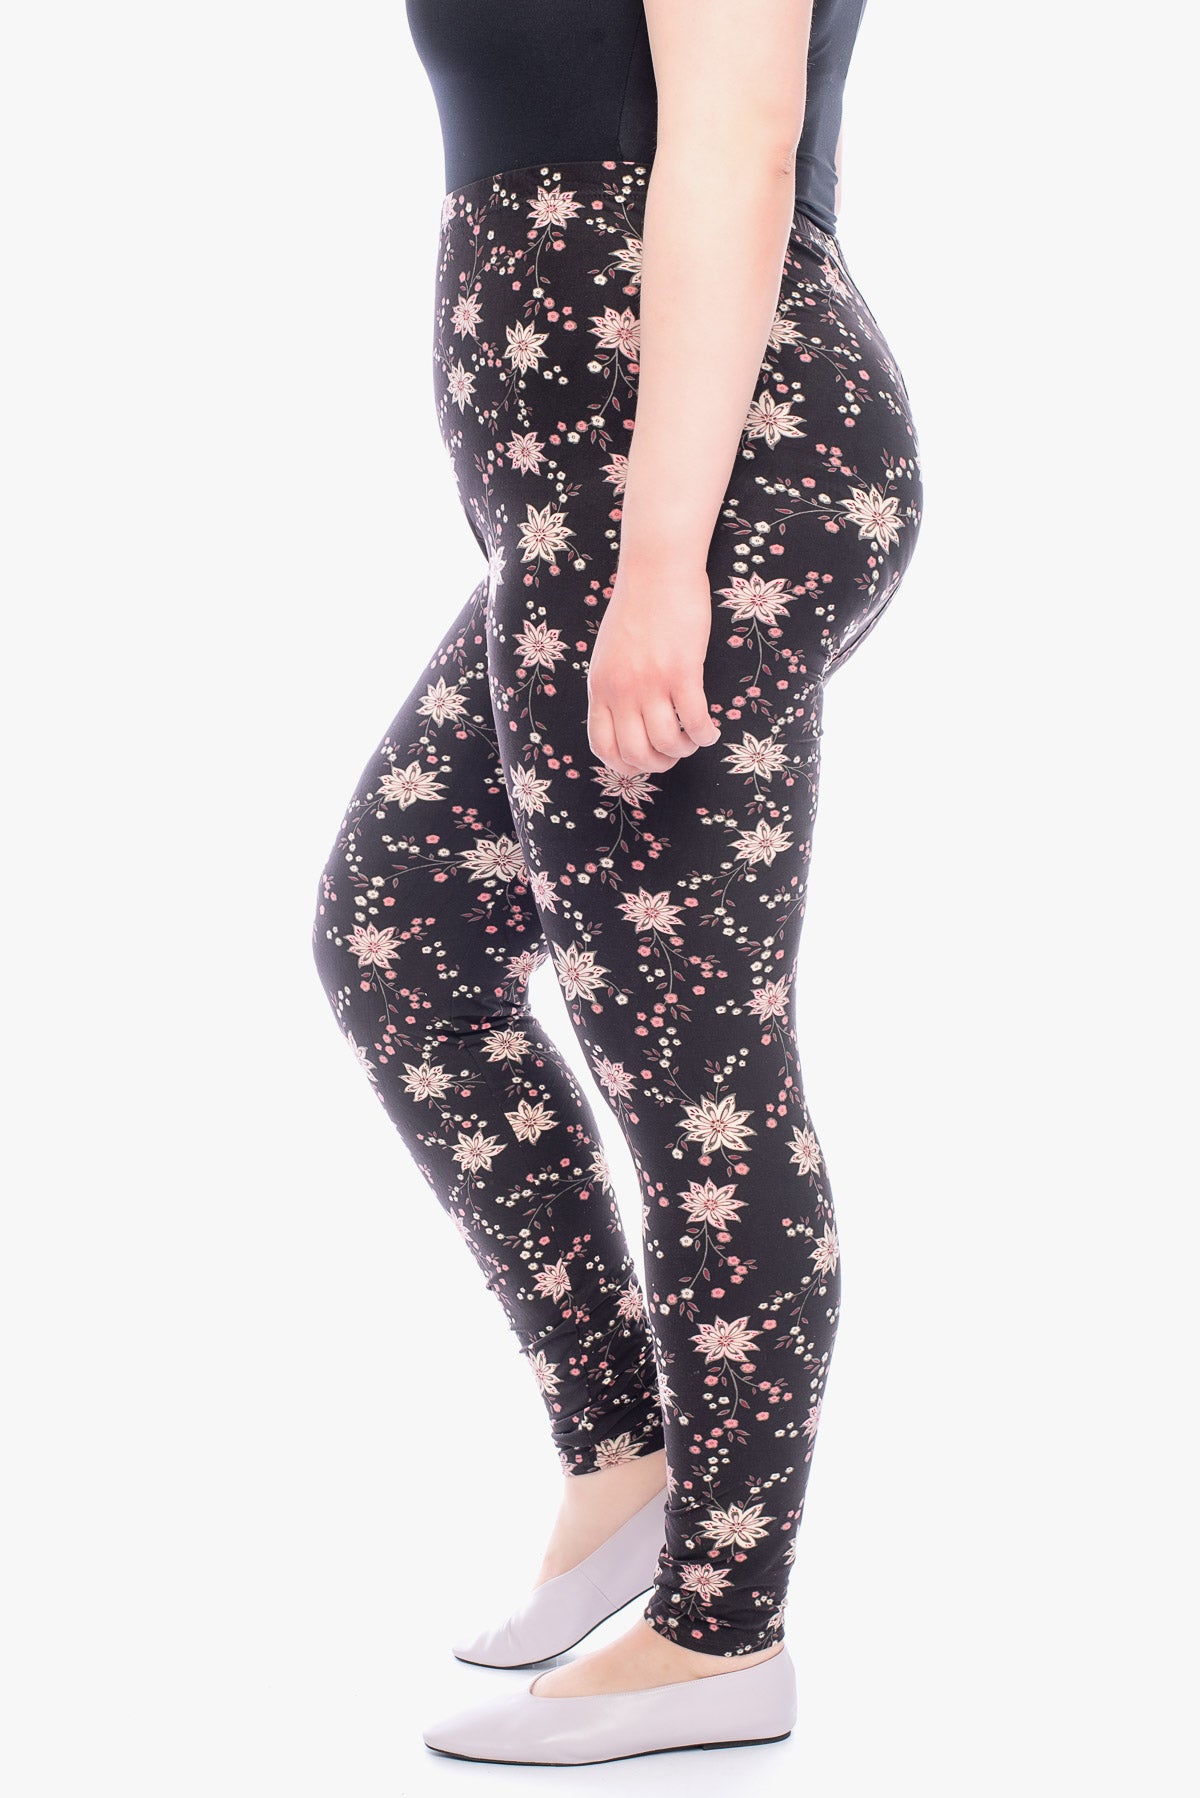 LILLY pink flowers leggings